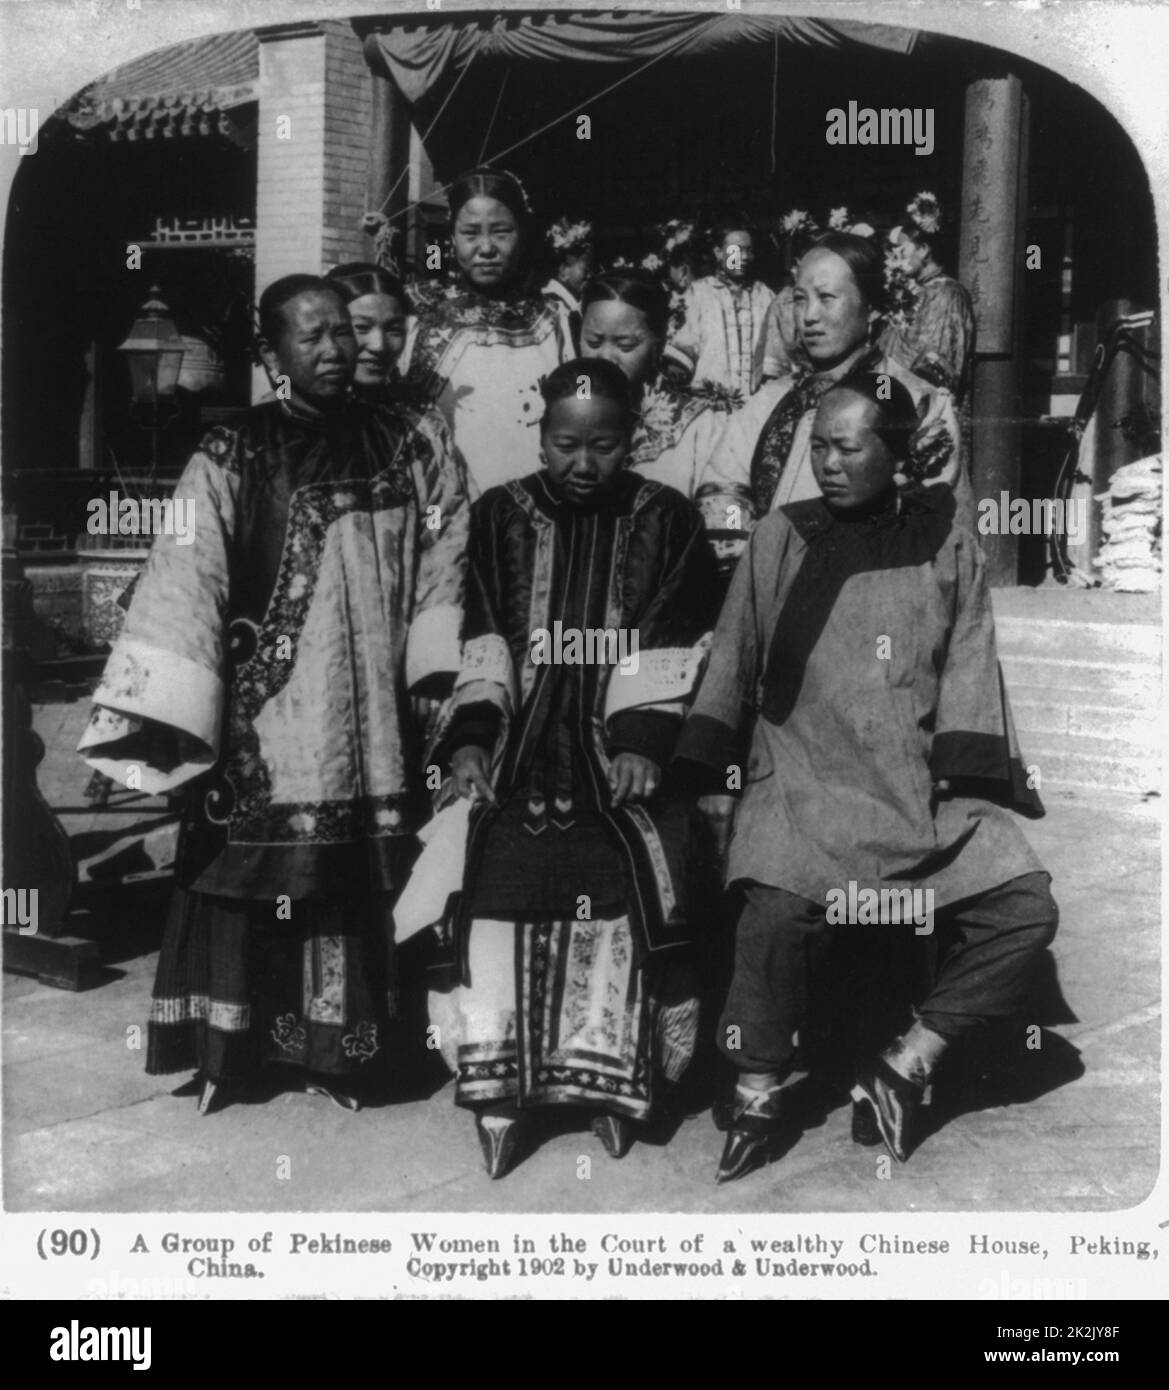 A group of Pekinese women in the court of a wealthy Chinese house, Peking, China c1902. photographic print on stereo card or stereograph. note the men in rows holding swords. Stock Photo